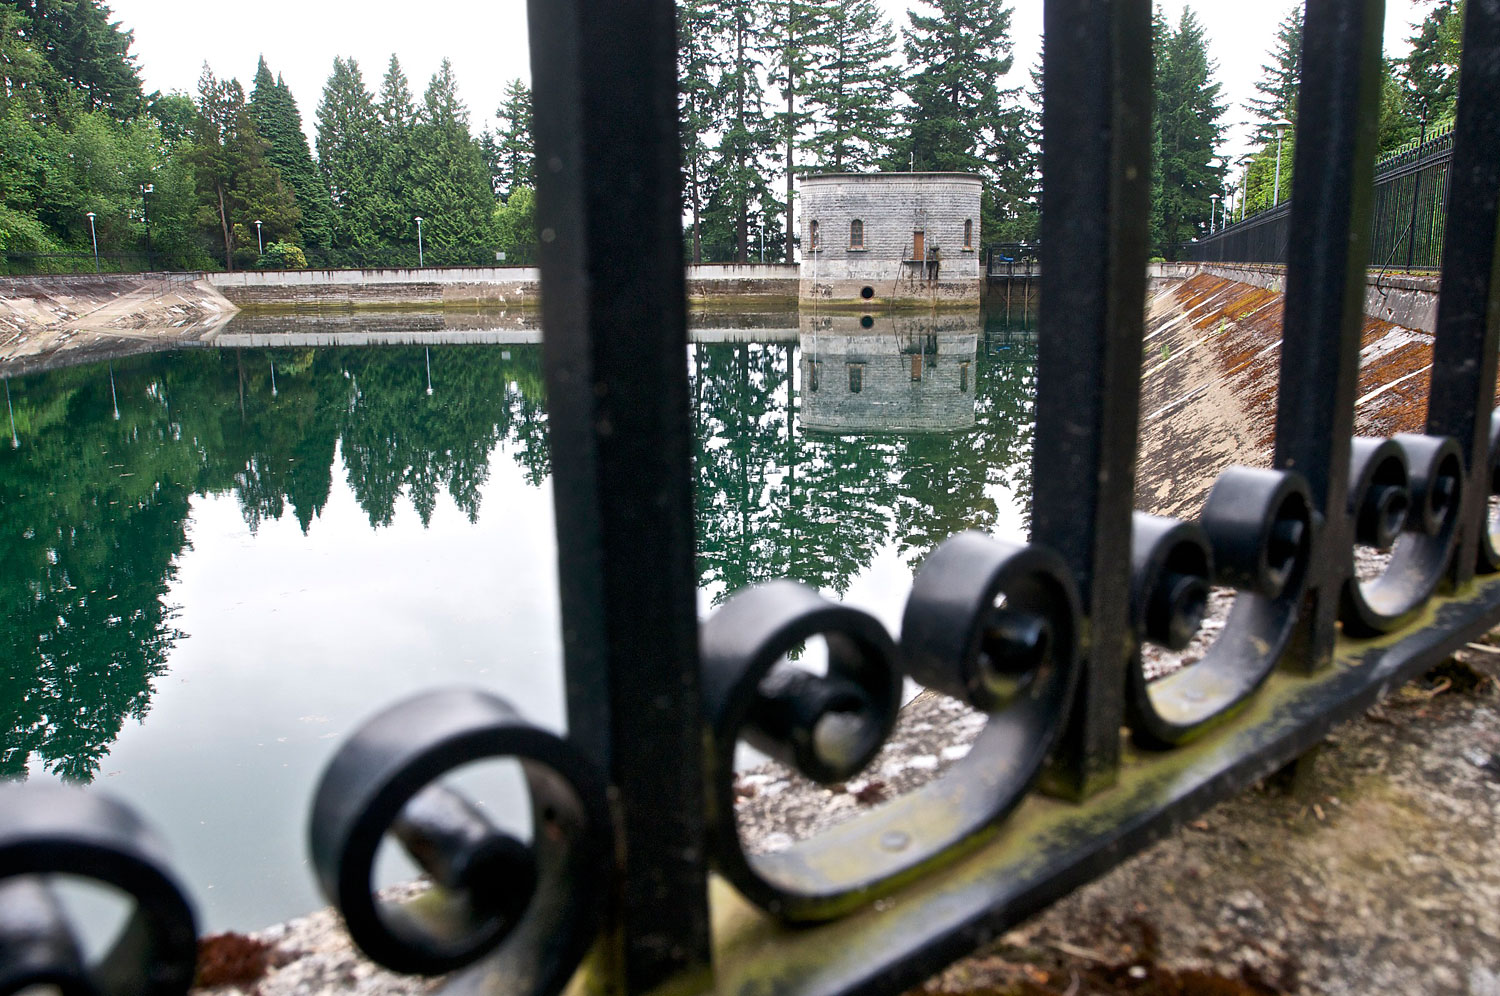 The Mount Tabor number 1 reservoir in Portland, Ore., seen 2011.